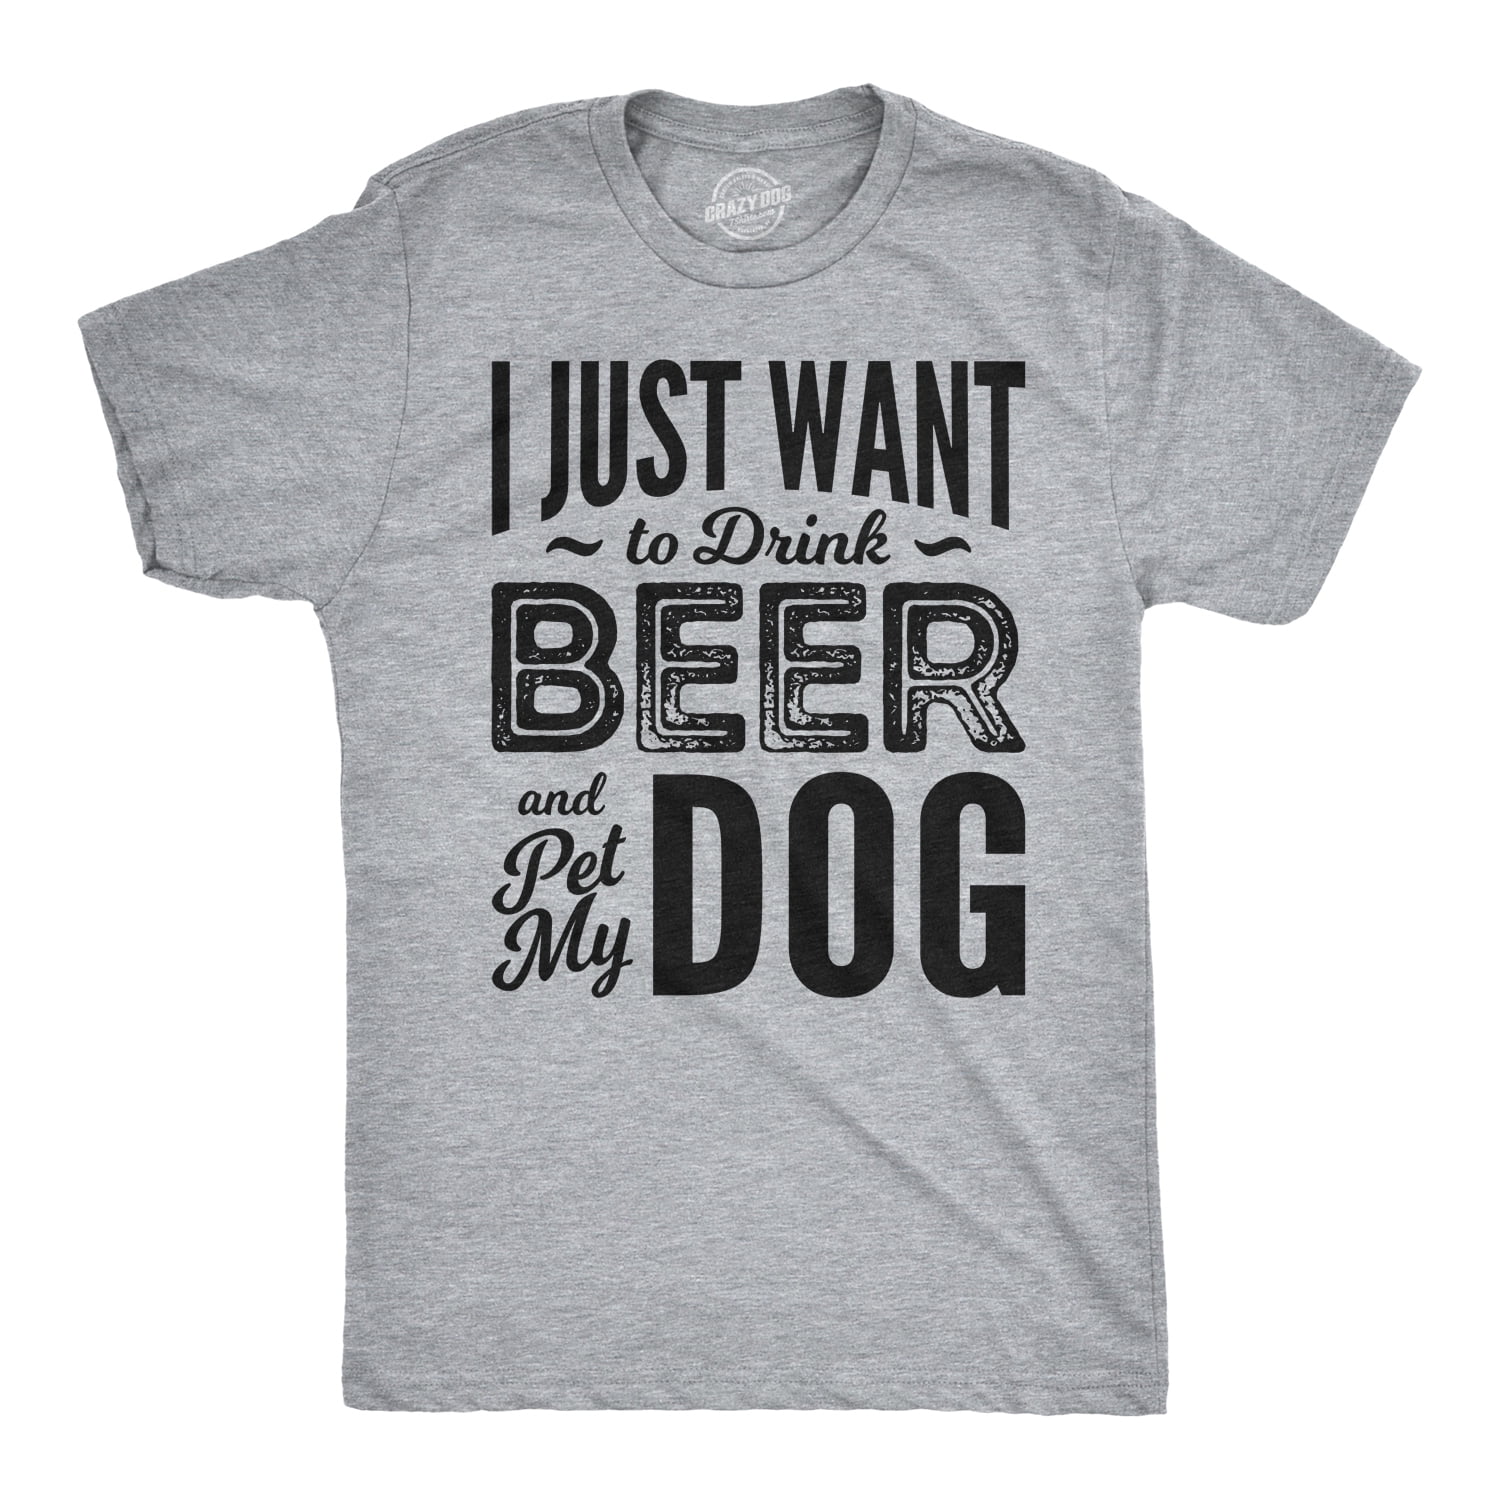 I Just Want to Drink Beer and Pet My Dog and Beer Lover T-Shirt